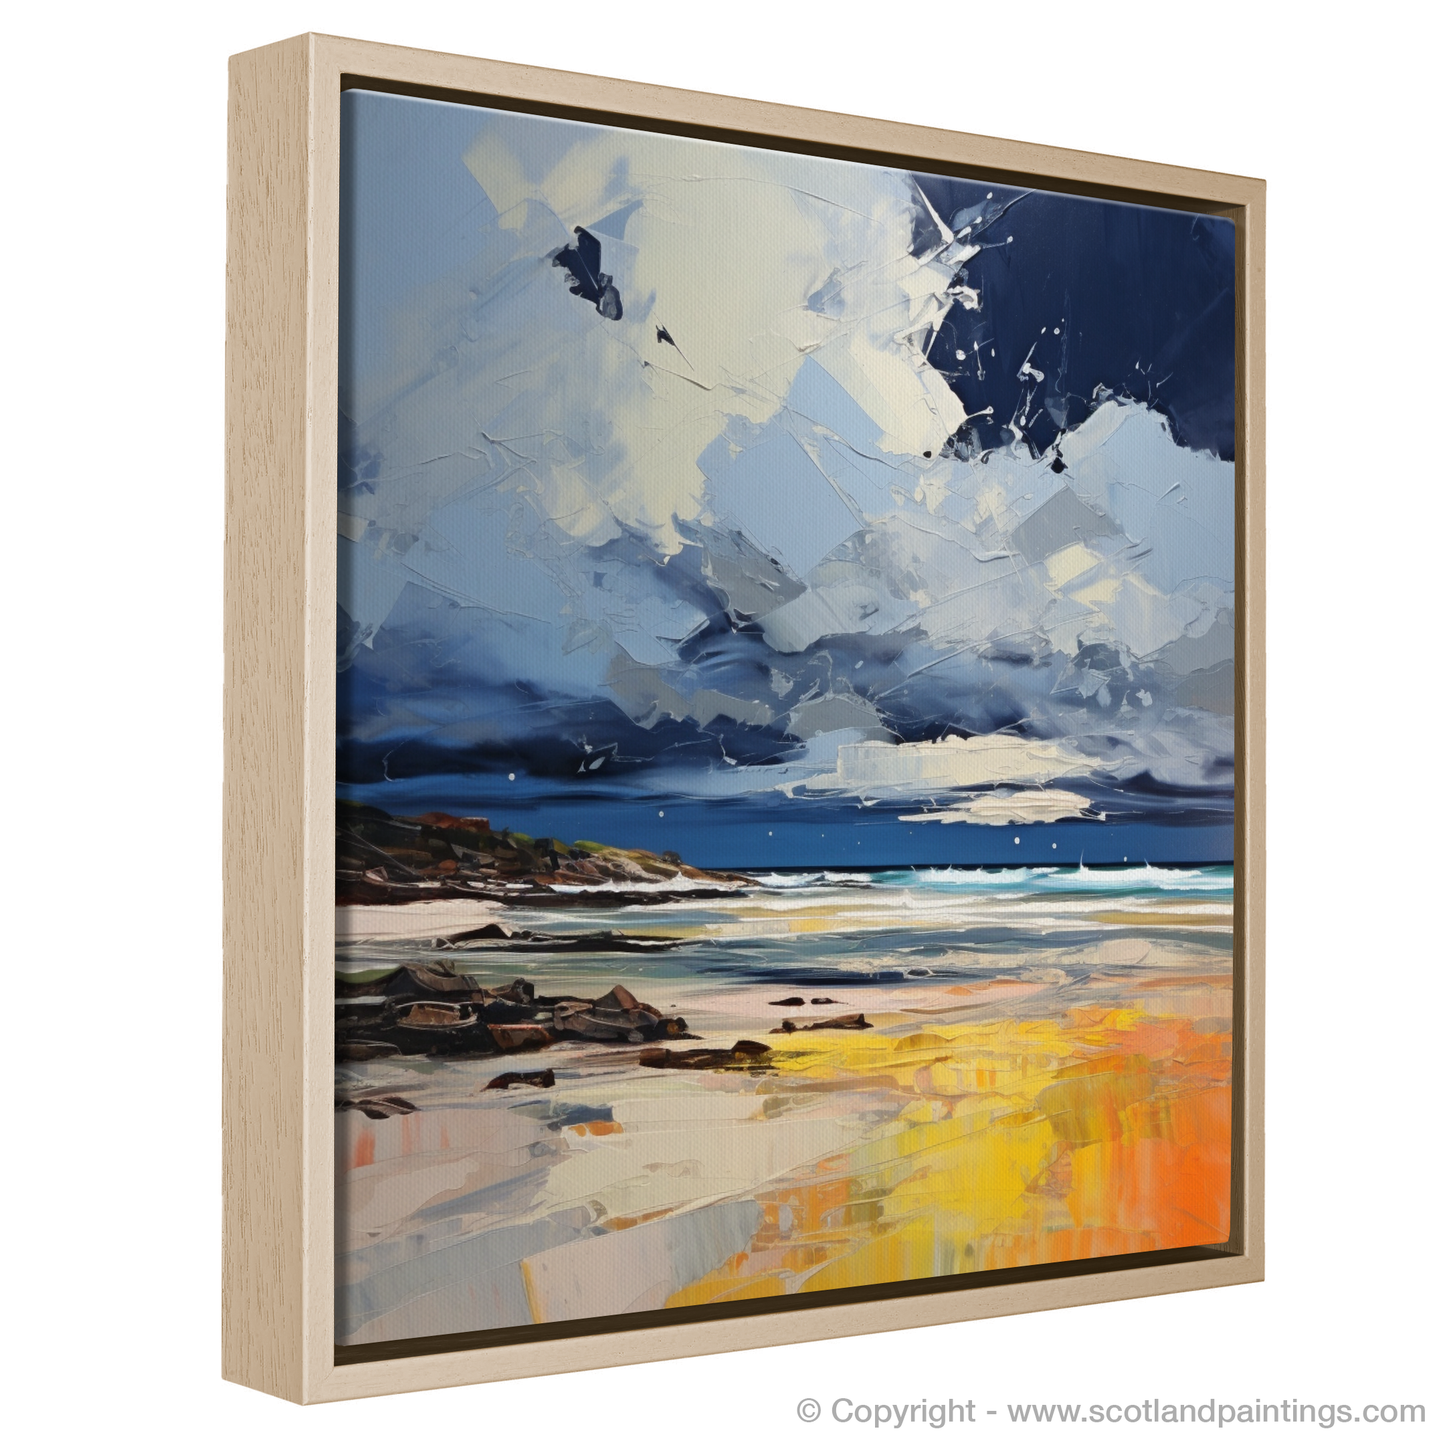 Painting and Art Print of West Sands with a stormy sky entitled "Tempest Over West Sands: An Expressionist Ode to Scotland's Coastal Majesty".